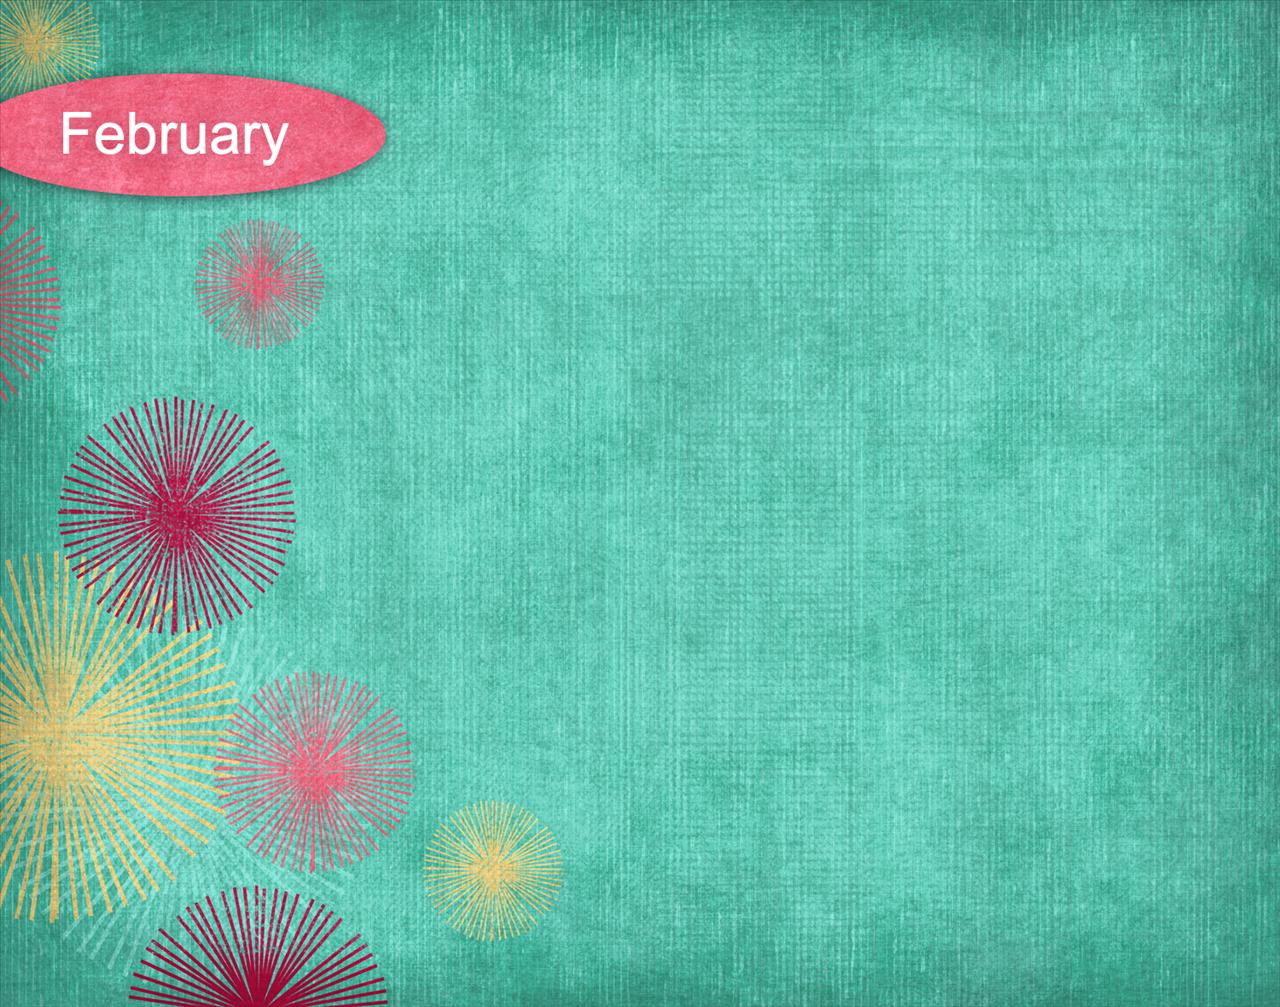 february-powerpoint-templates